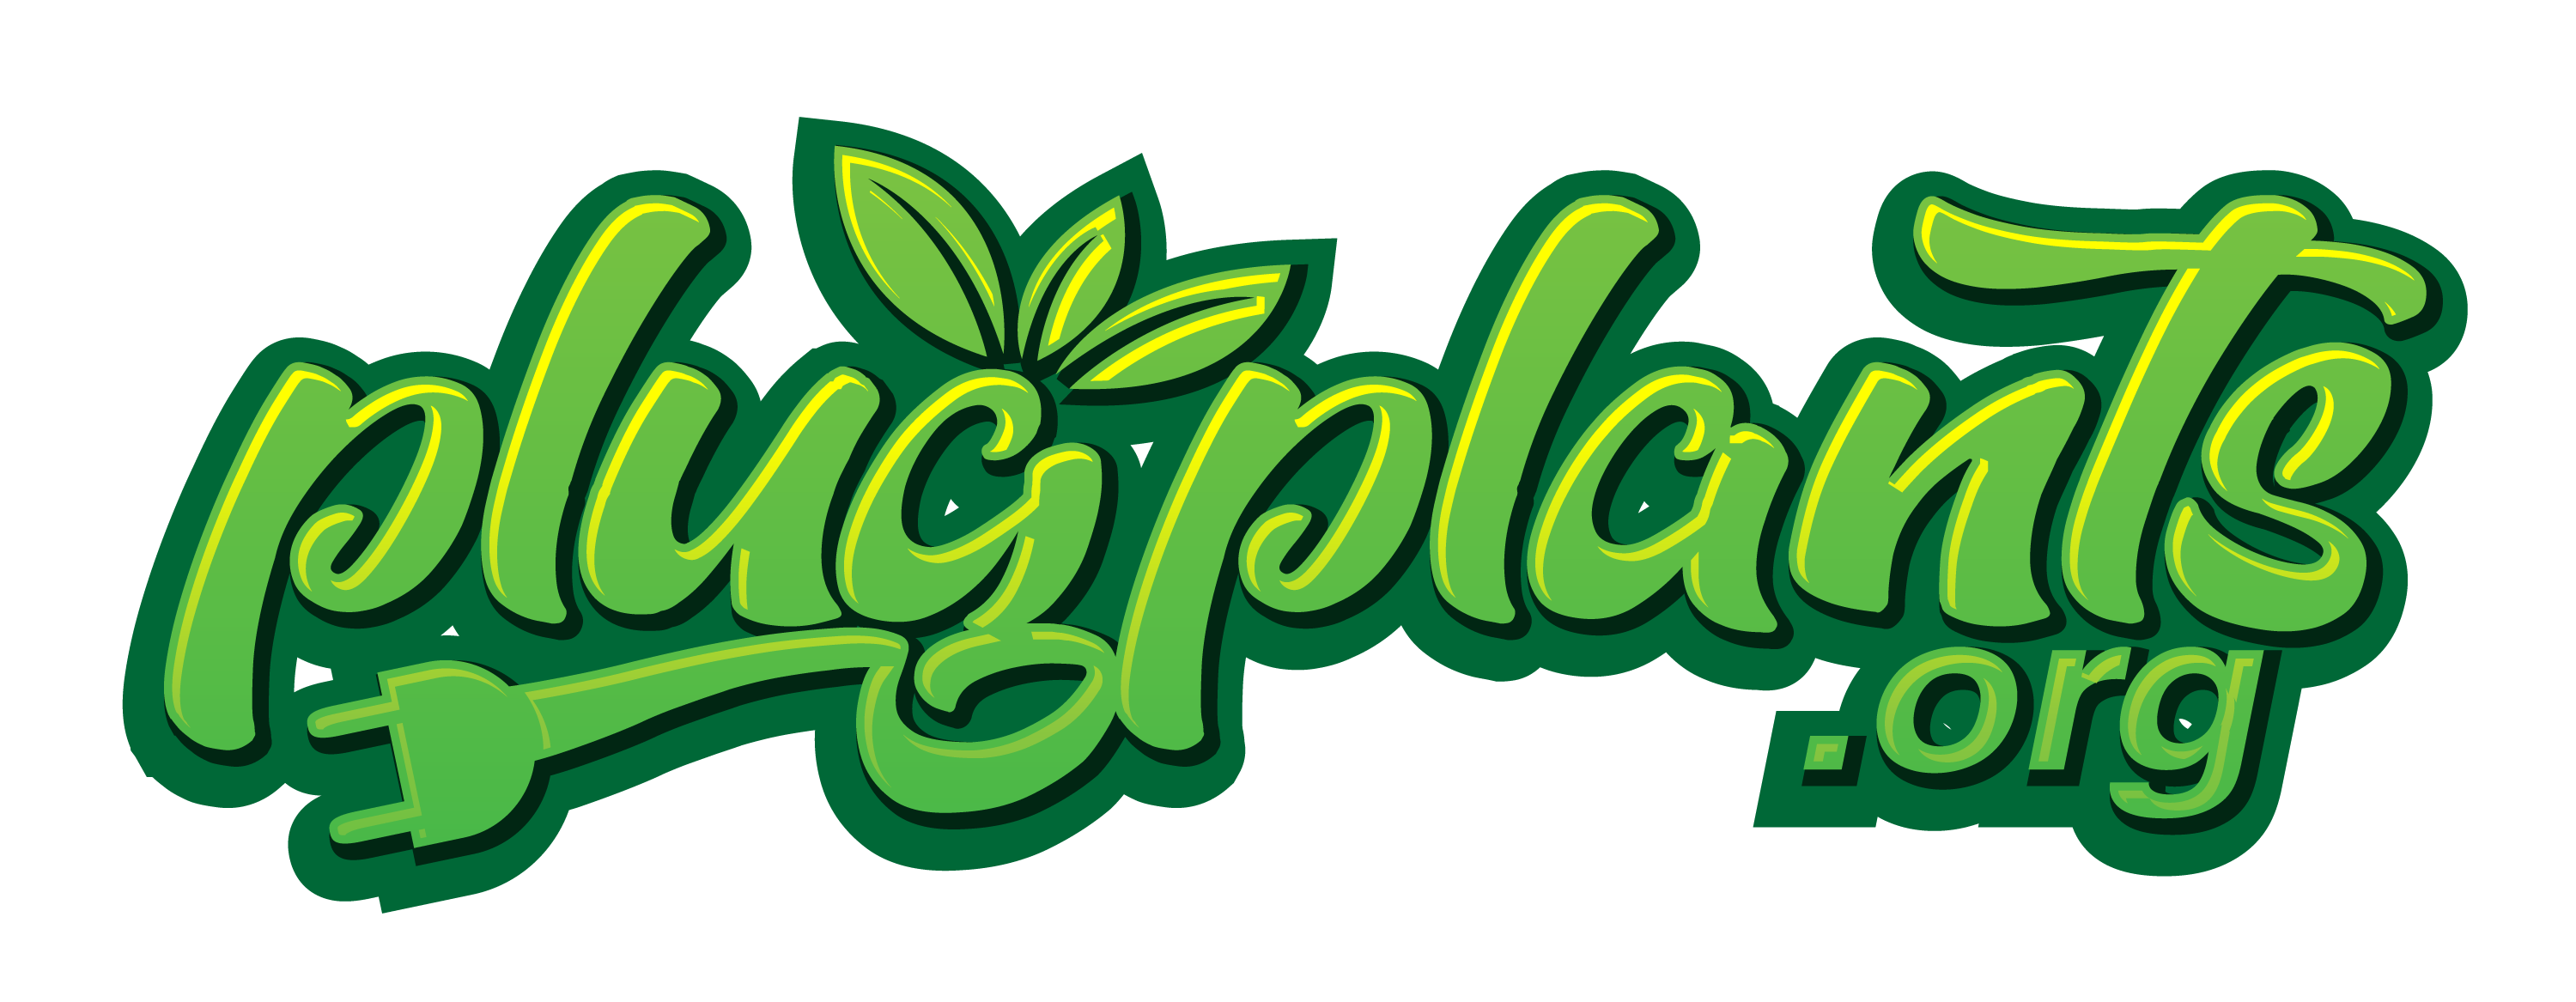 planting clipart wilted plant